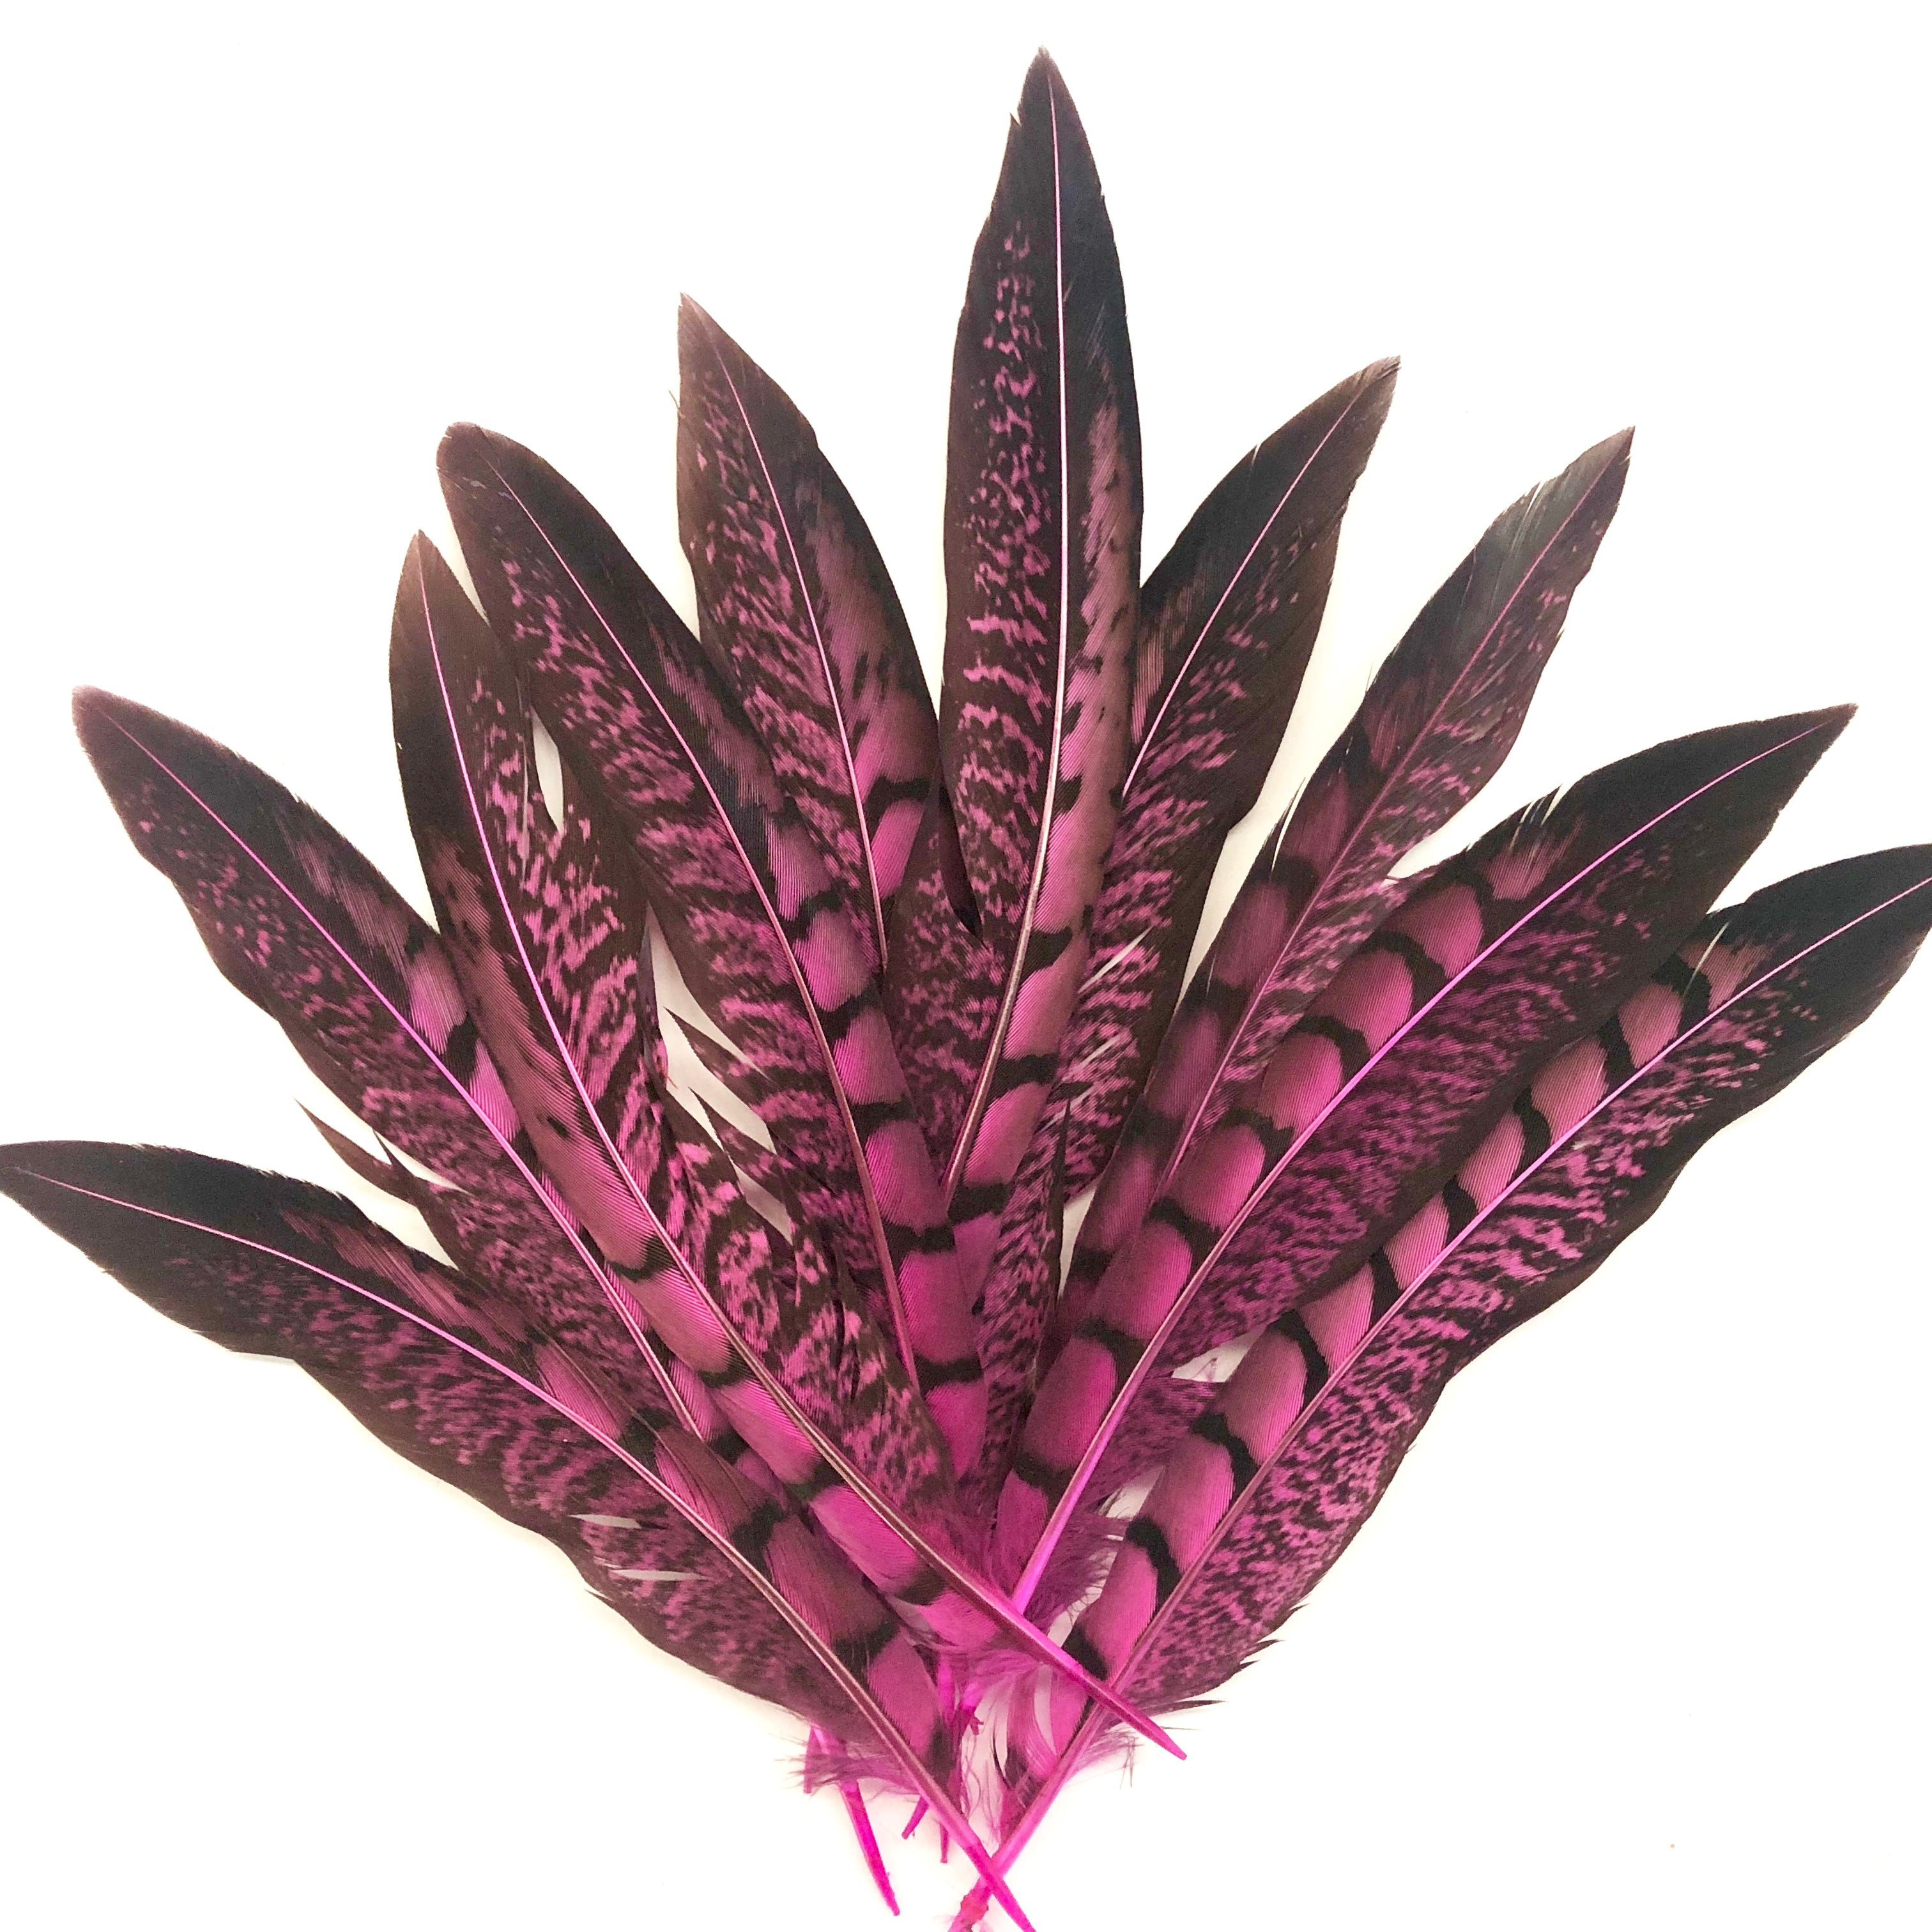 5" to 10" Lady Amherst Pheasant Side Tail Feather x 10 pcs - Hot Pink